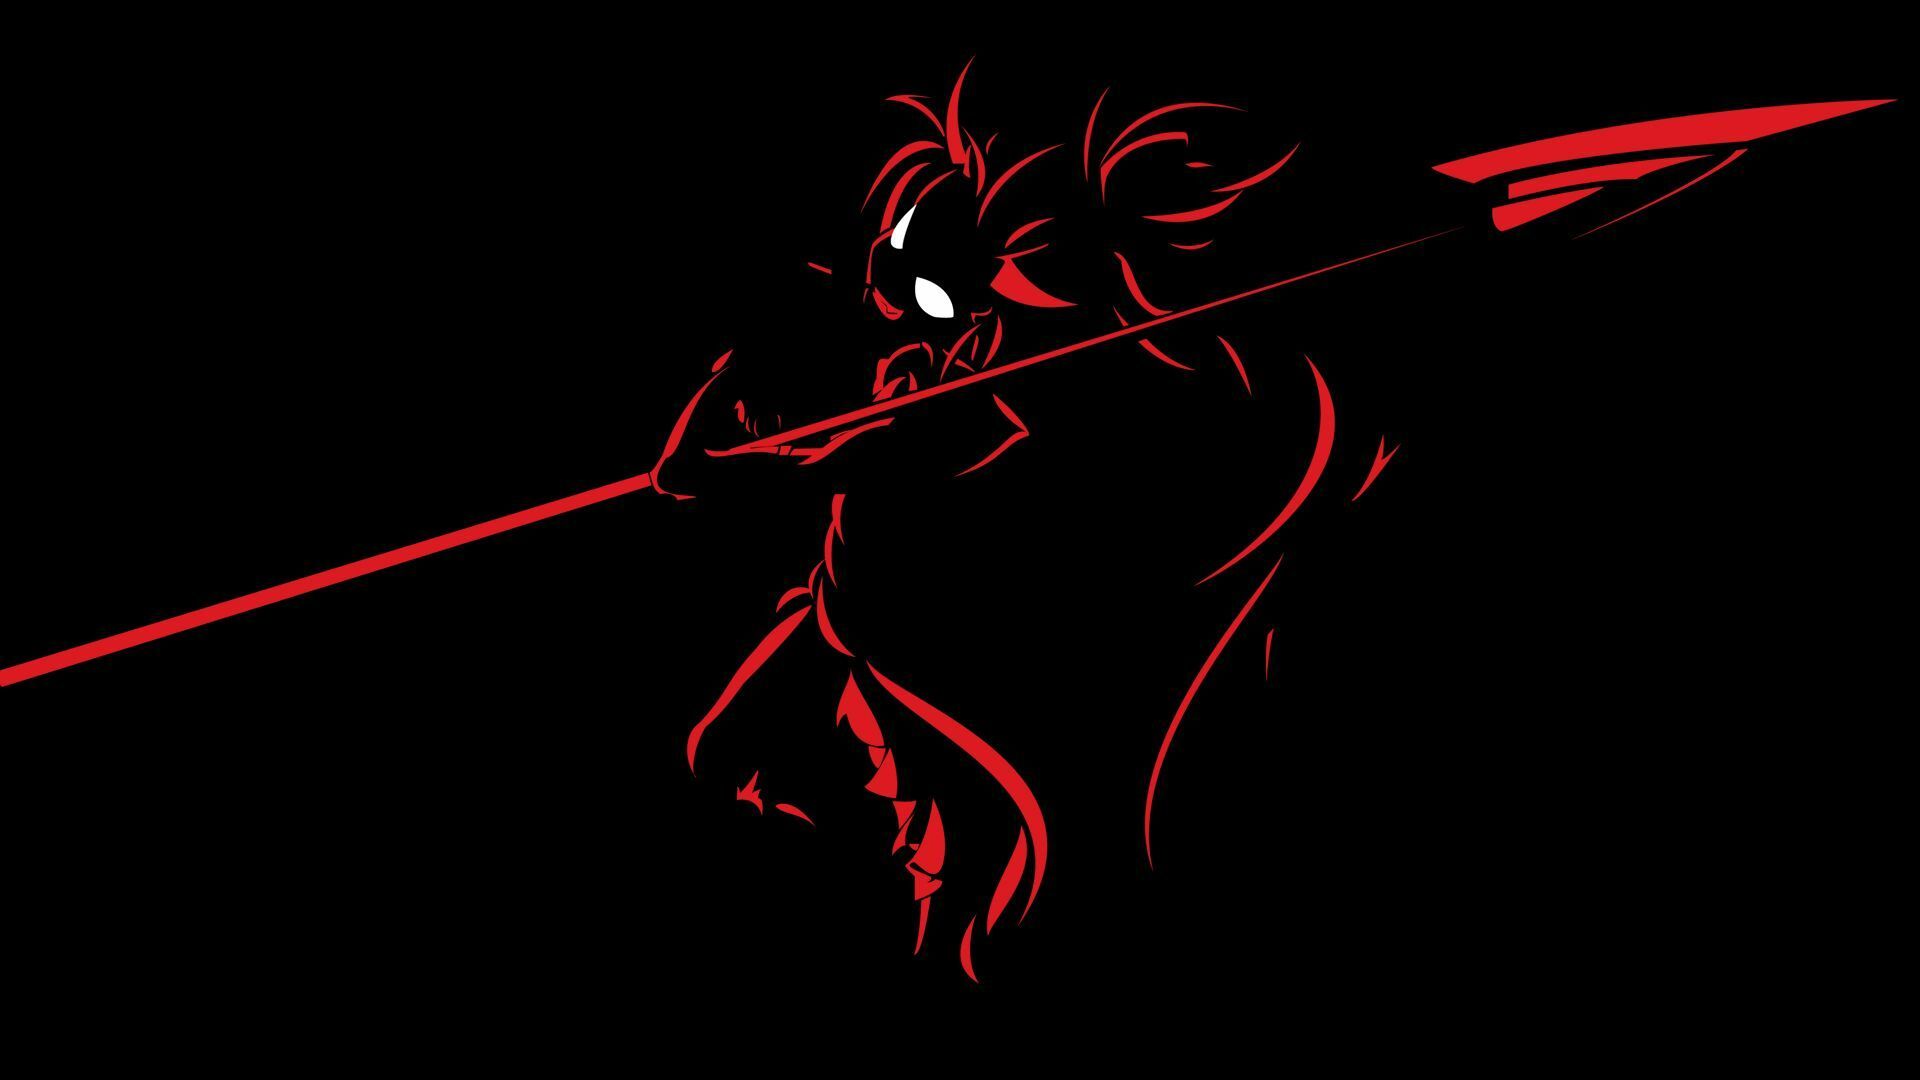 Black and red anime wallpaper [DOWNLOAD FREE]